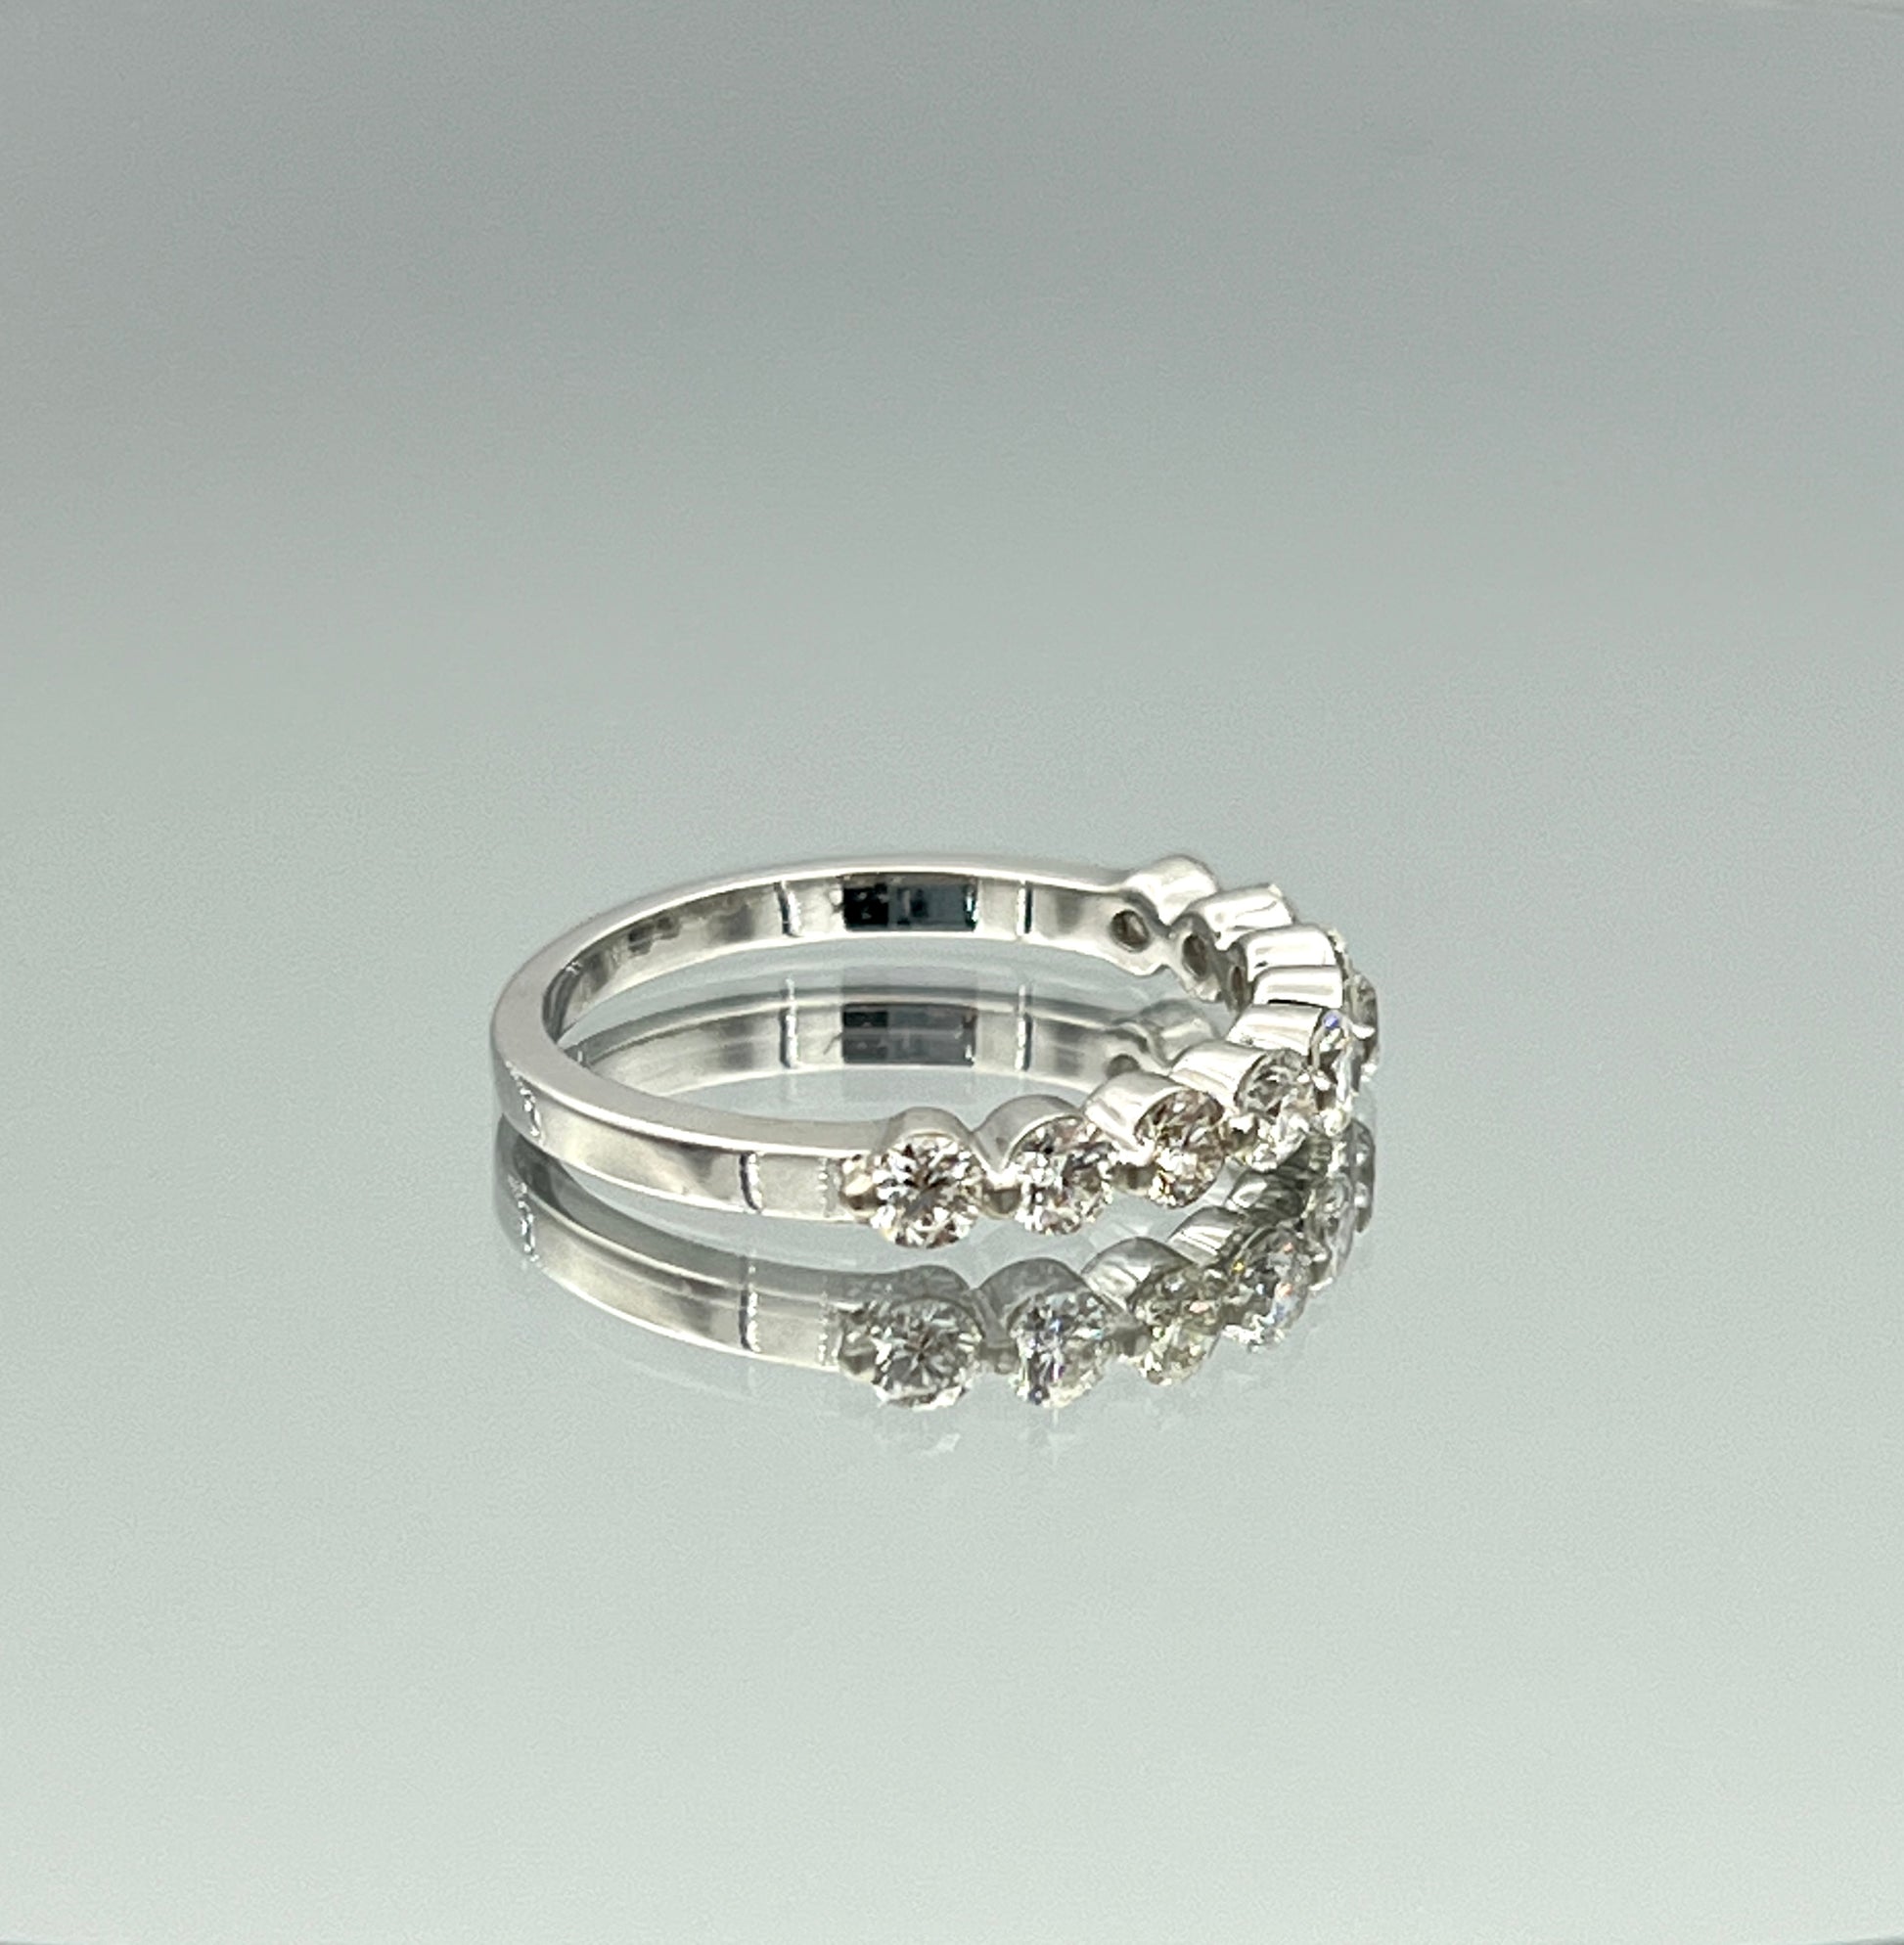 Floating Nine-Stone Round Brilliant-Cut Diamond Ring in 14K White Gold - L and L Jewelry